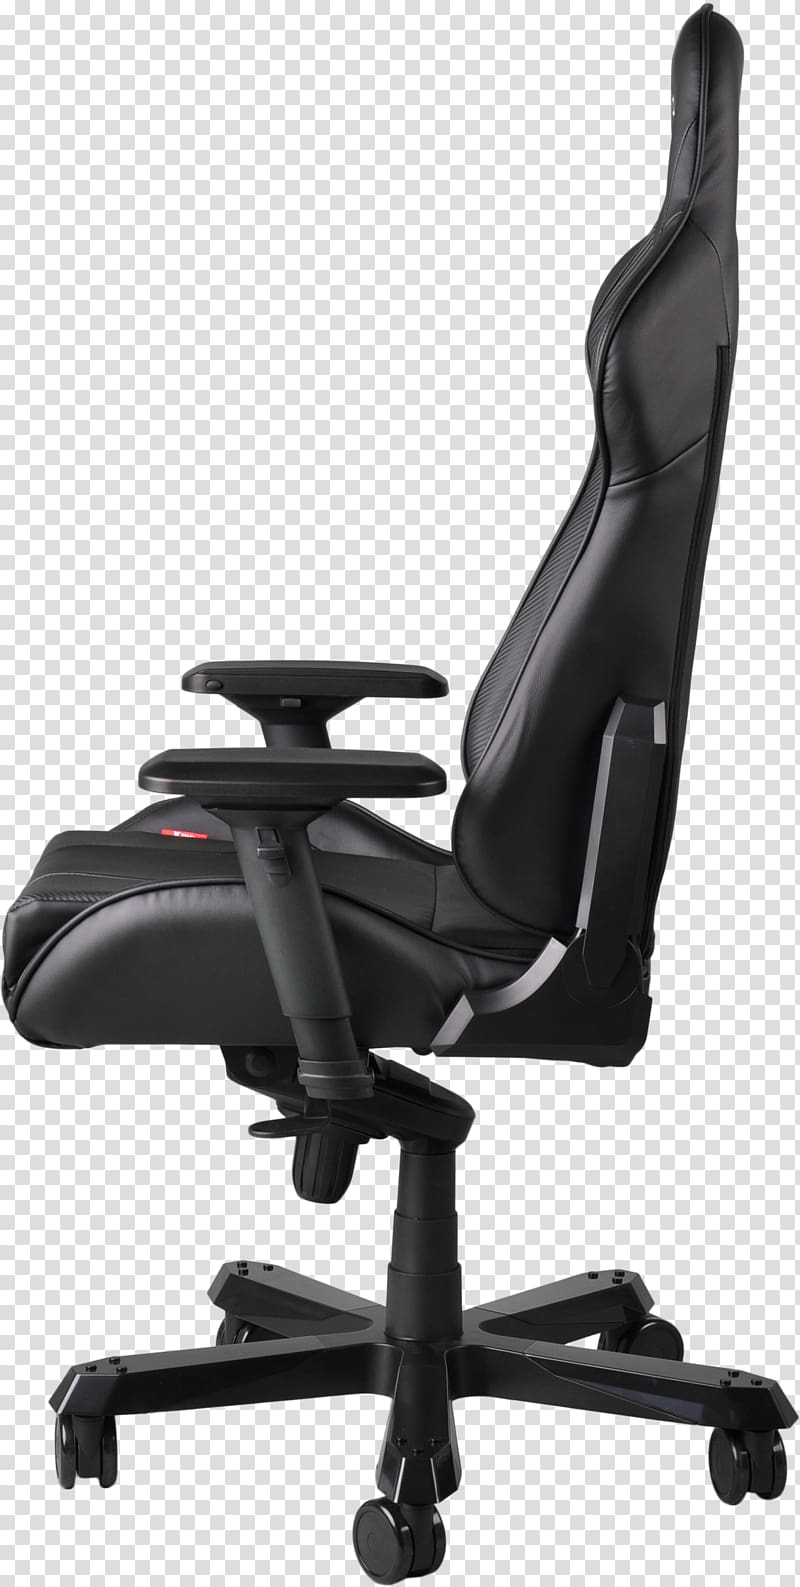 Gaming chair DXRacer Office & Desk Chairs Wing chair, chair transparent background PNG clipart